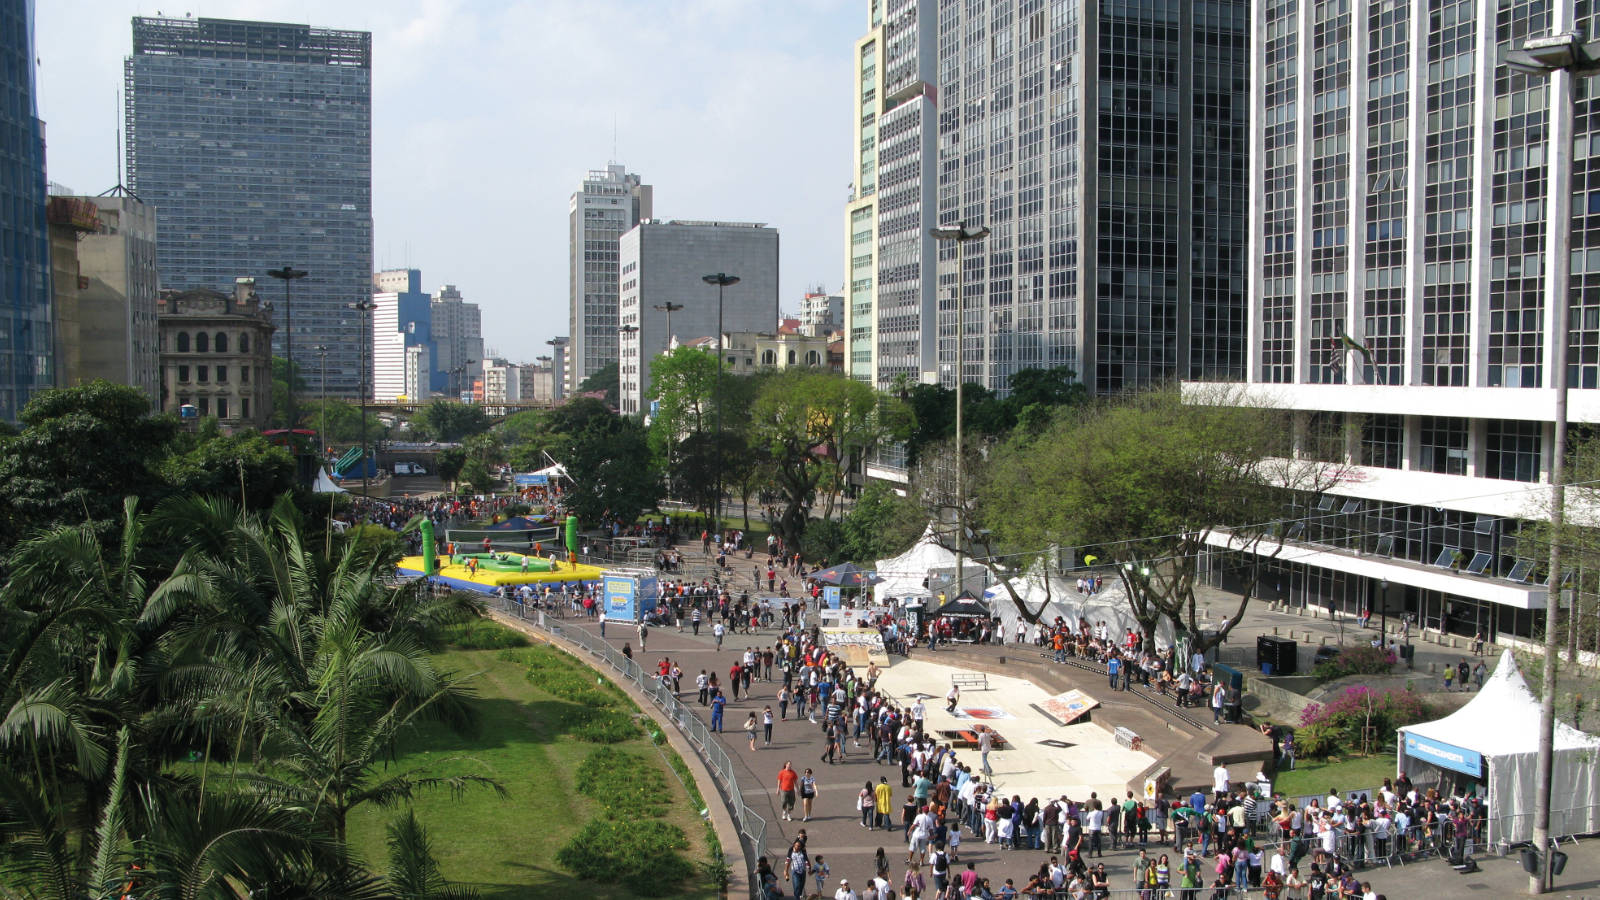 Virada Esportiva’ recreational sports event to enliven public space in the centre of São Paulo